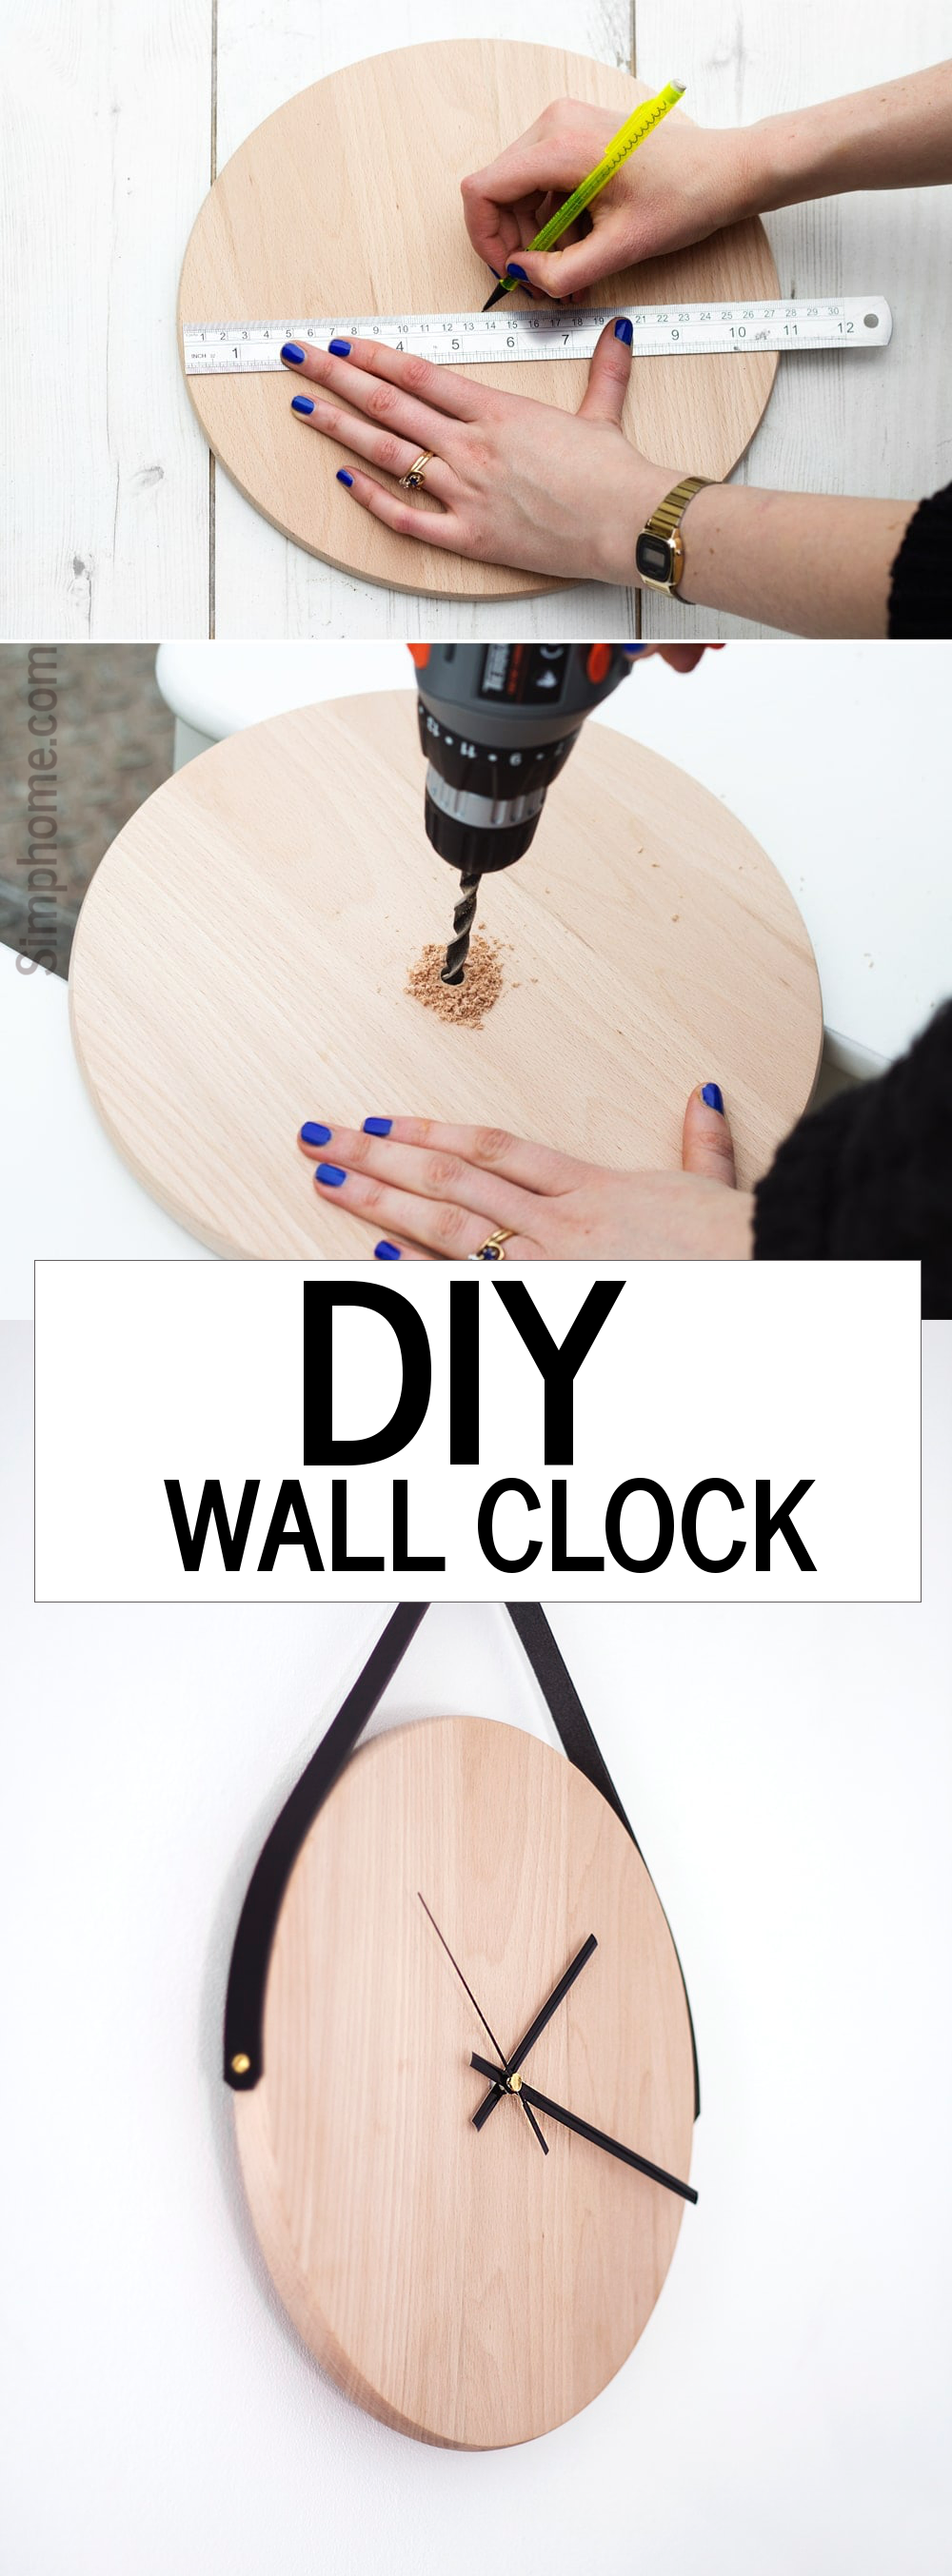 07 DIY Wall clock by the lovely drawer simphome com